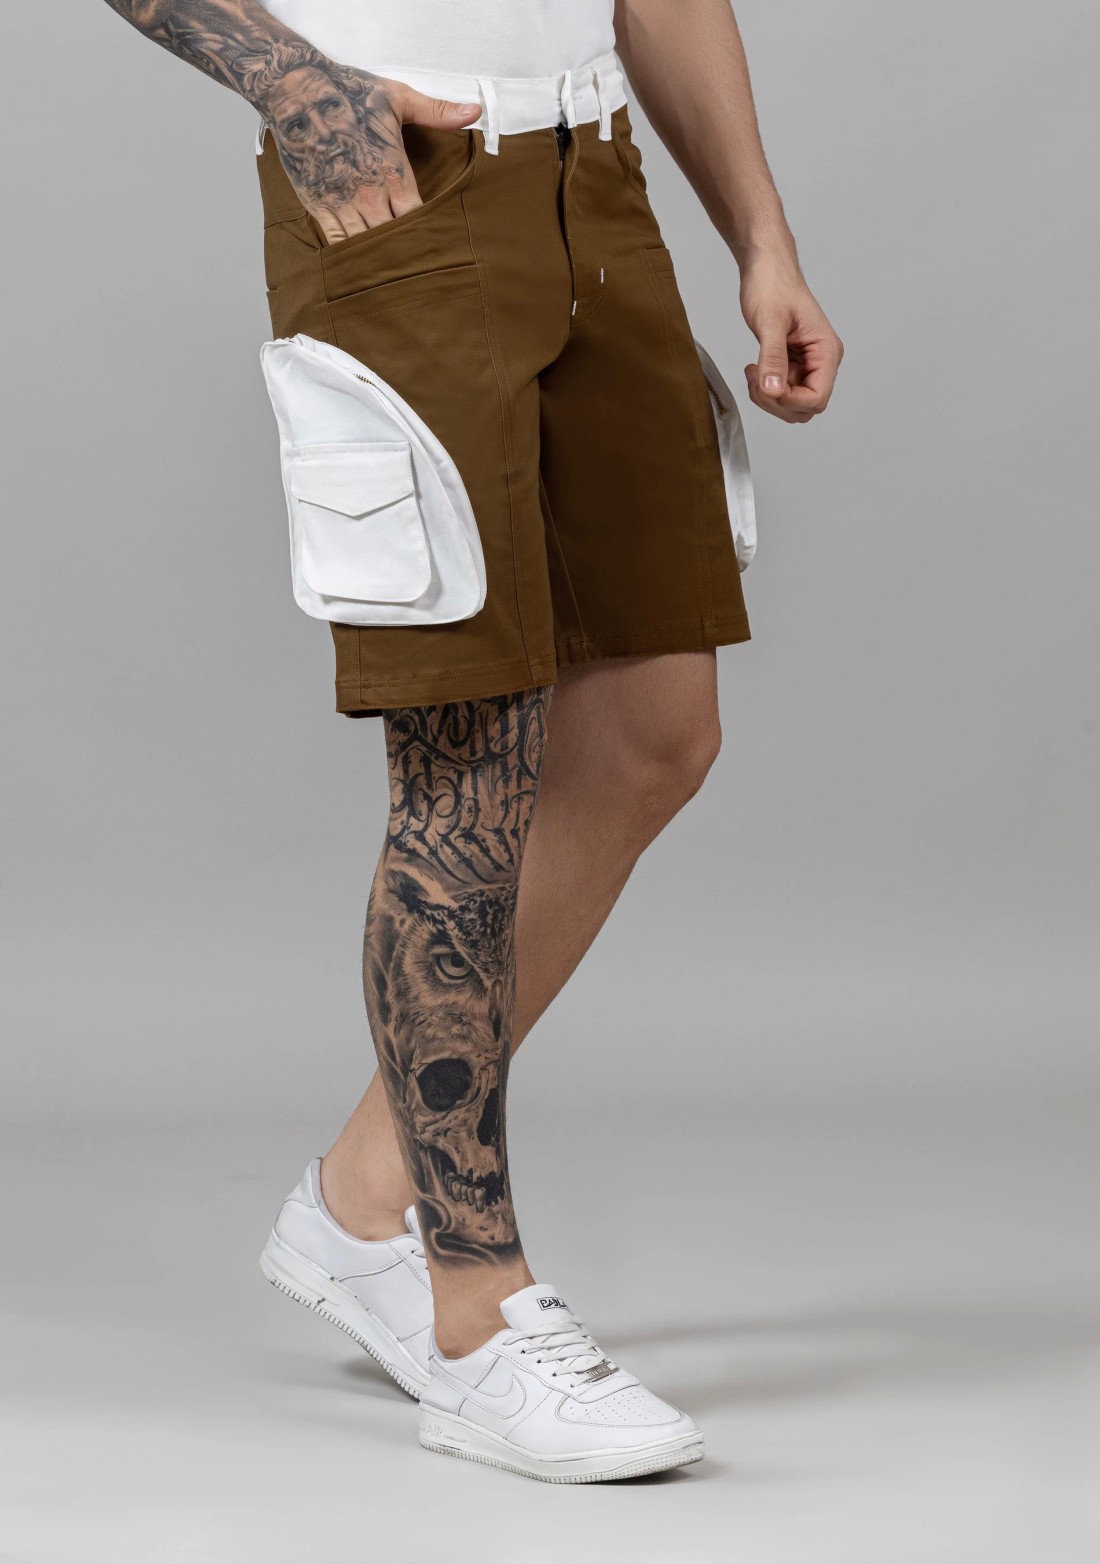 Brown and White Regular Fit Men’s Casual Cotton Shorts